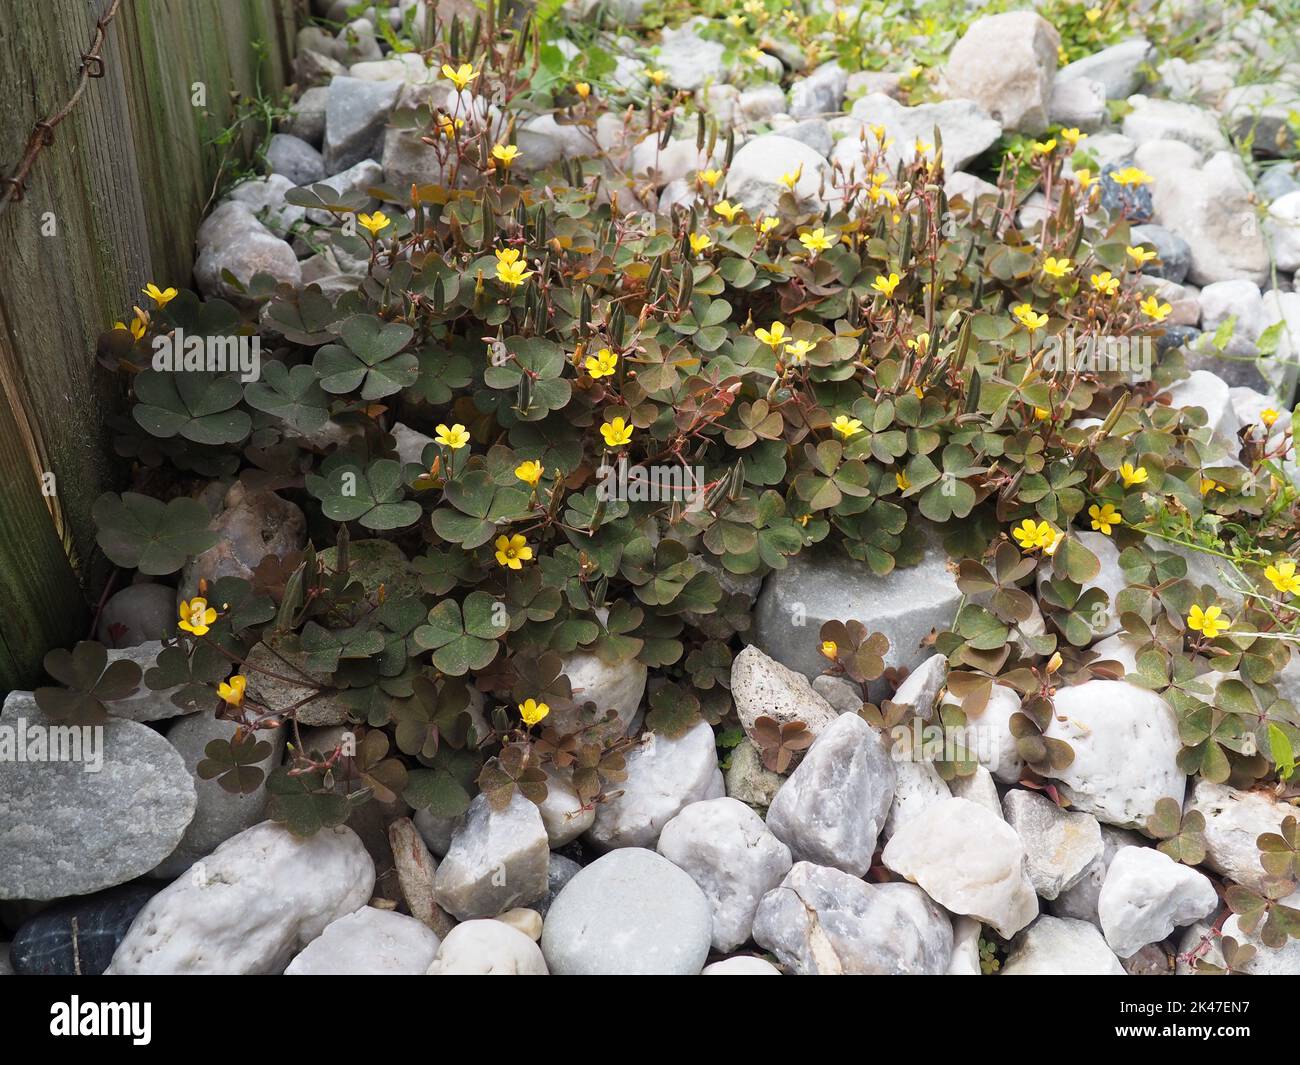 small oxalis vulcanicola plant with yellow flowers growing among white pebbles in an urban park Stock Photo